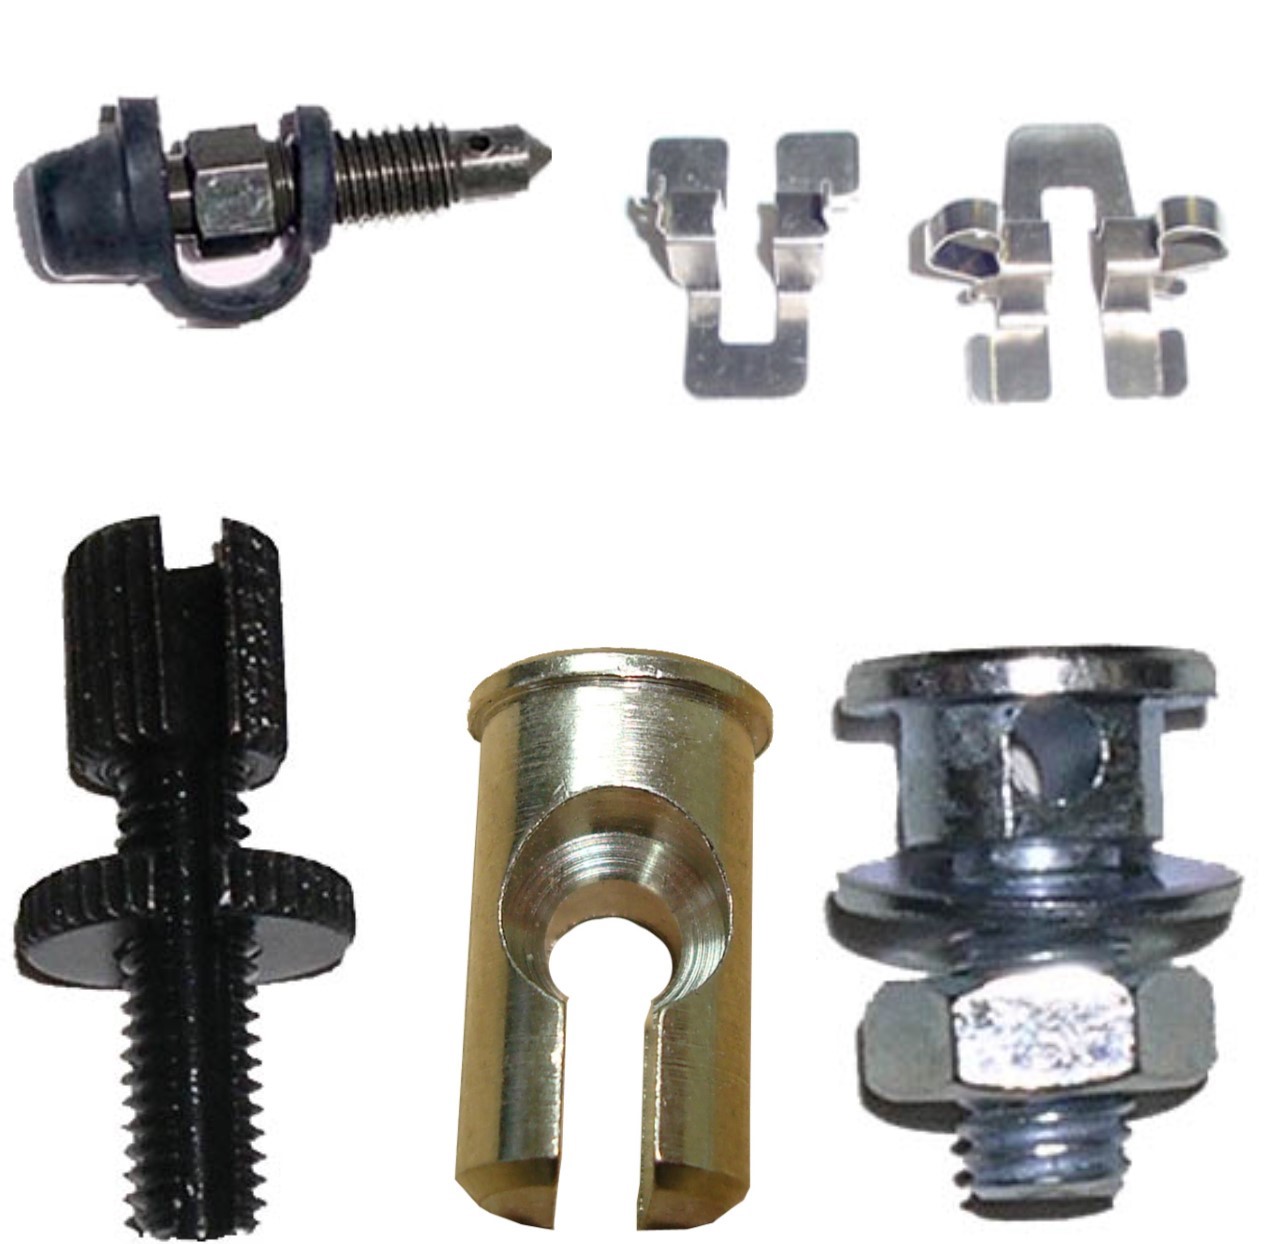 Brake Parts and Adjusters